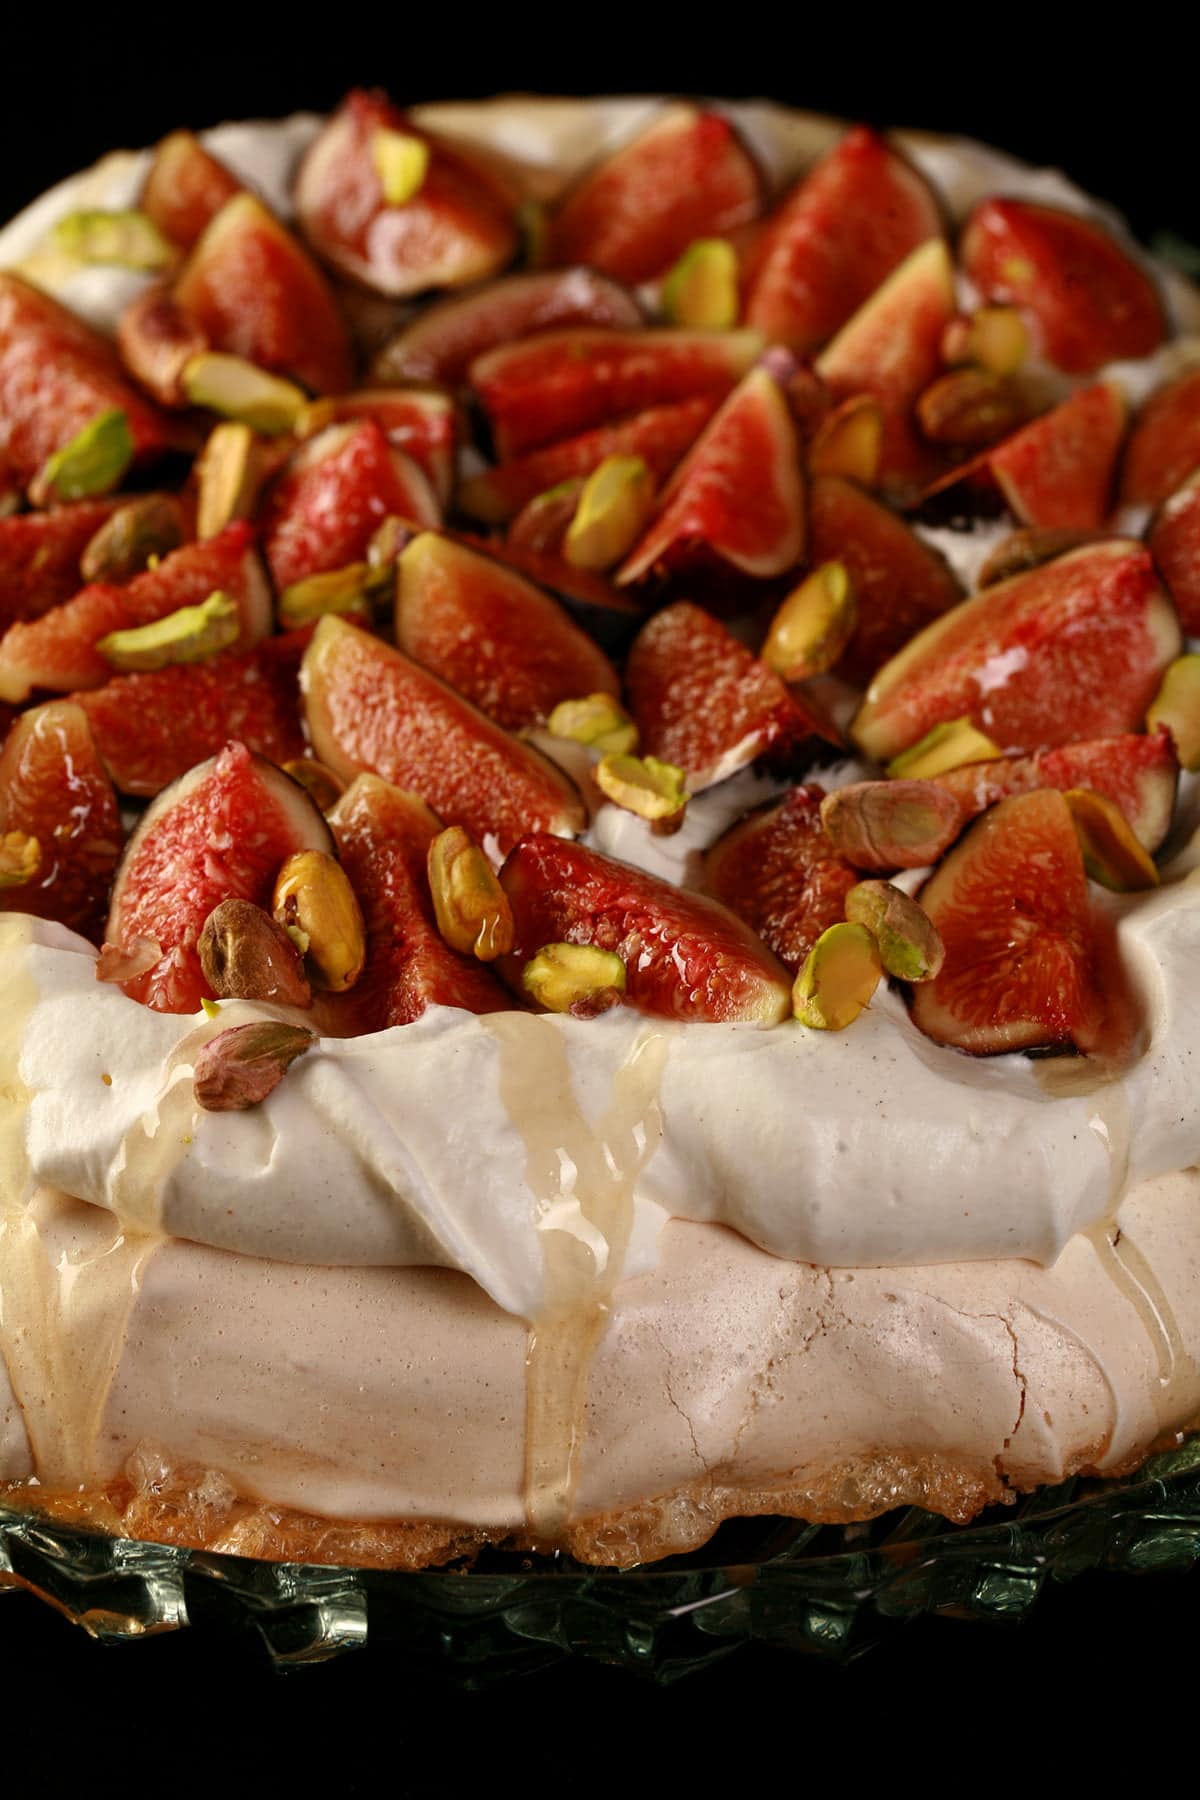 An ivory coloured meringue round, piled with whipped cream, sliced figs, and pistachios. A drizzle of honey finishes it off.